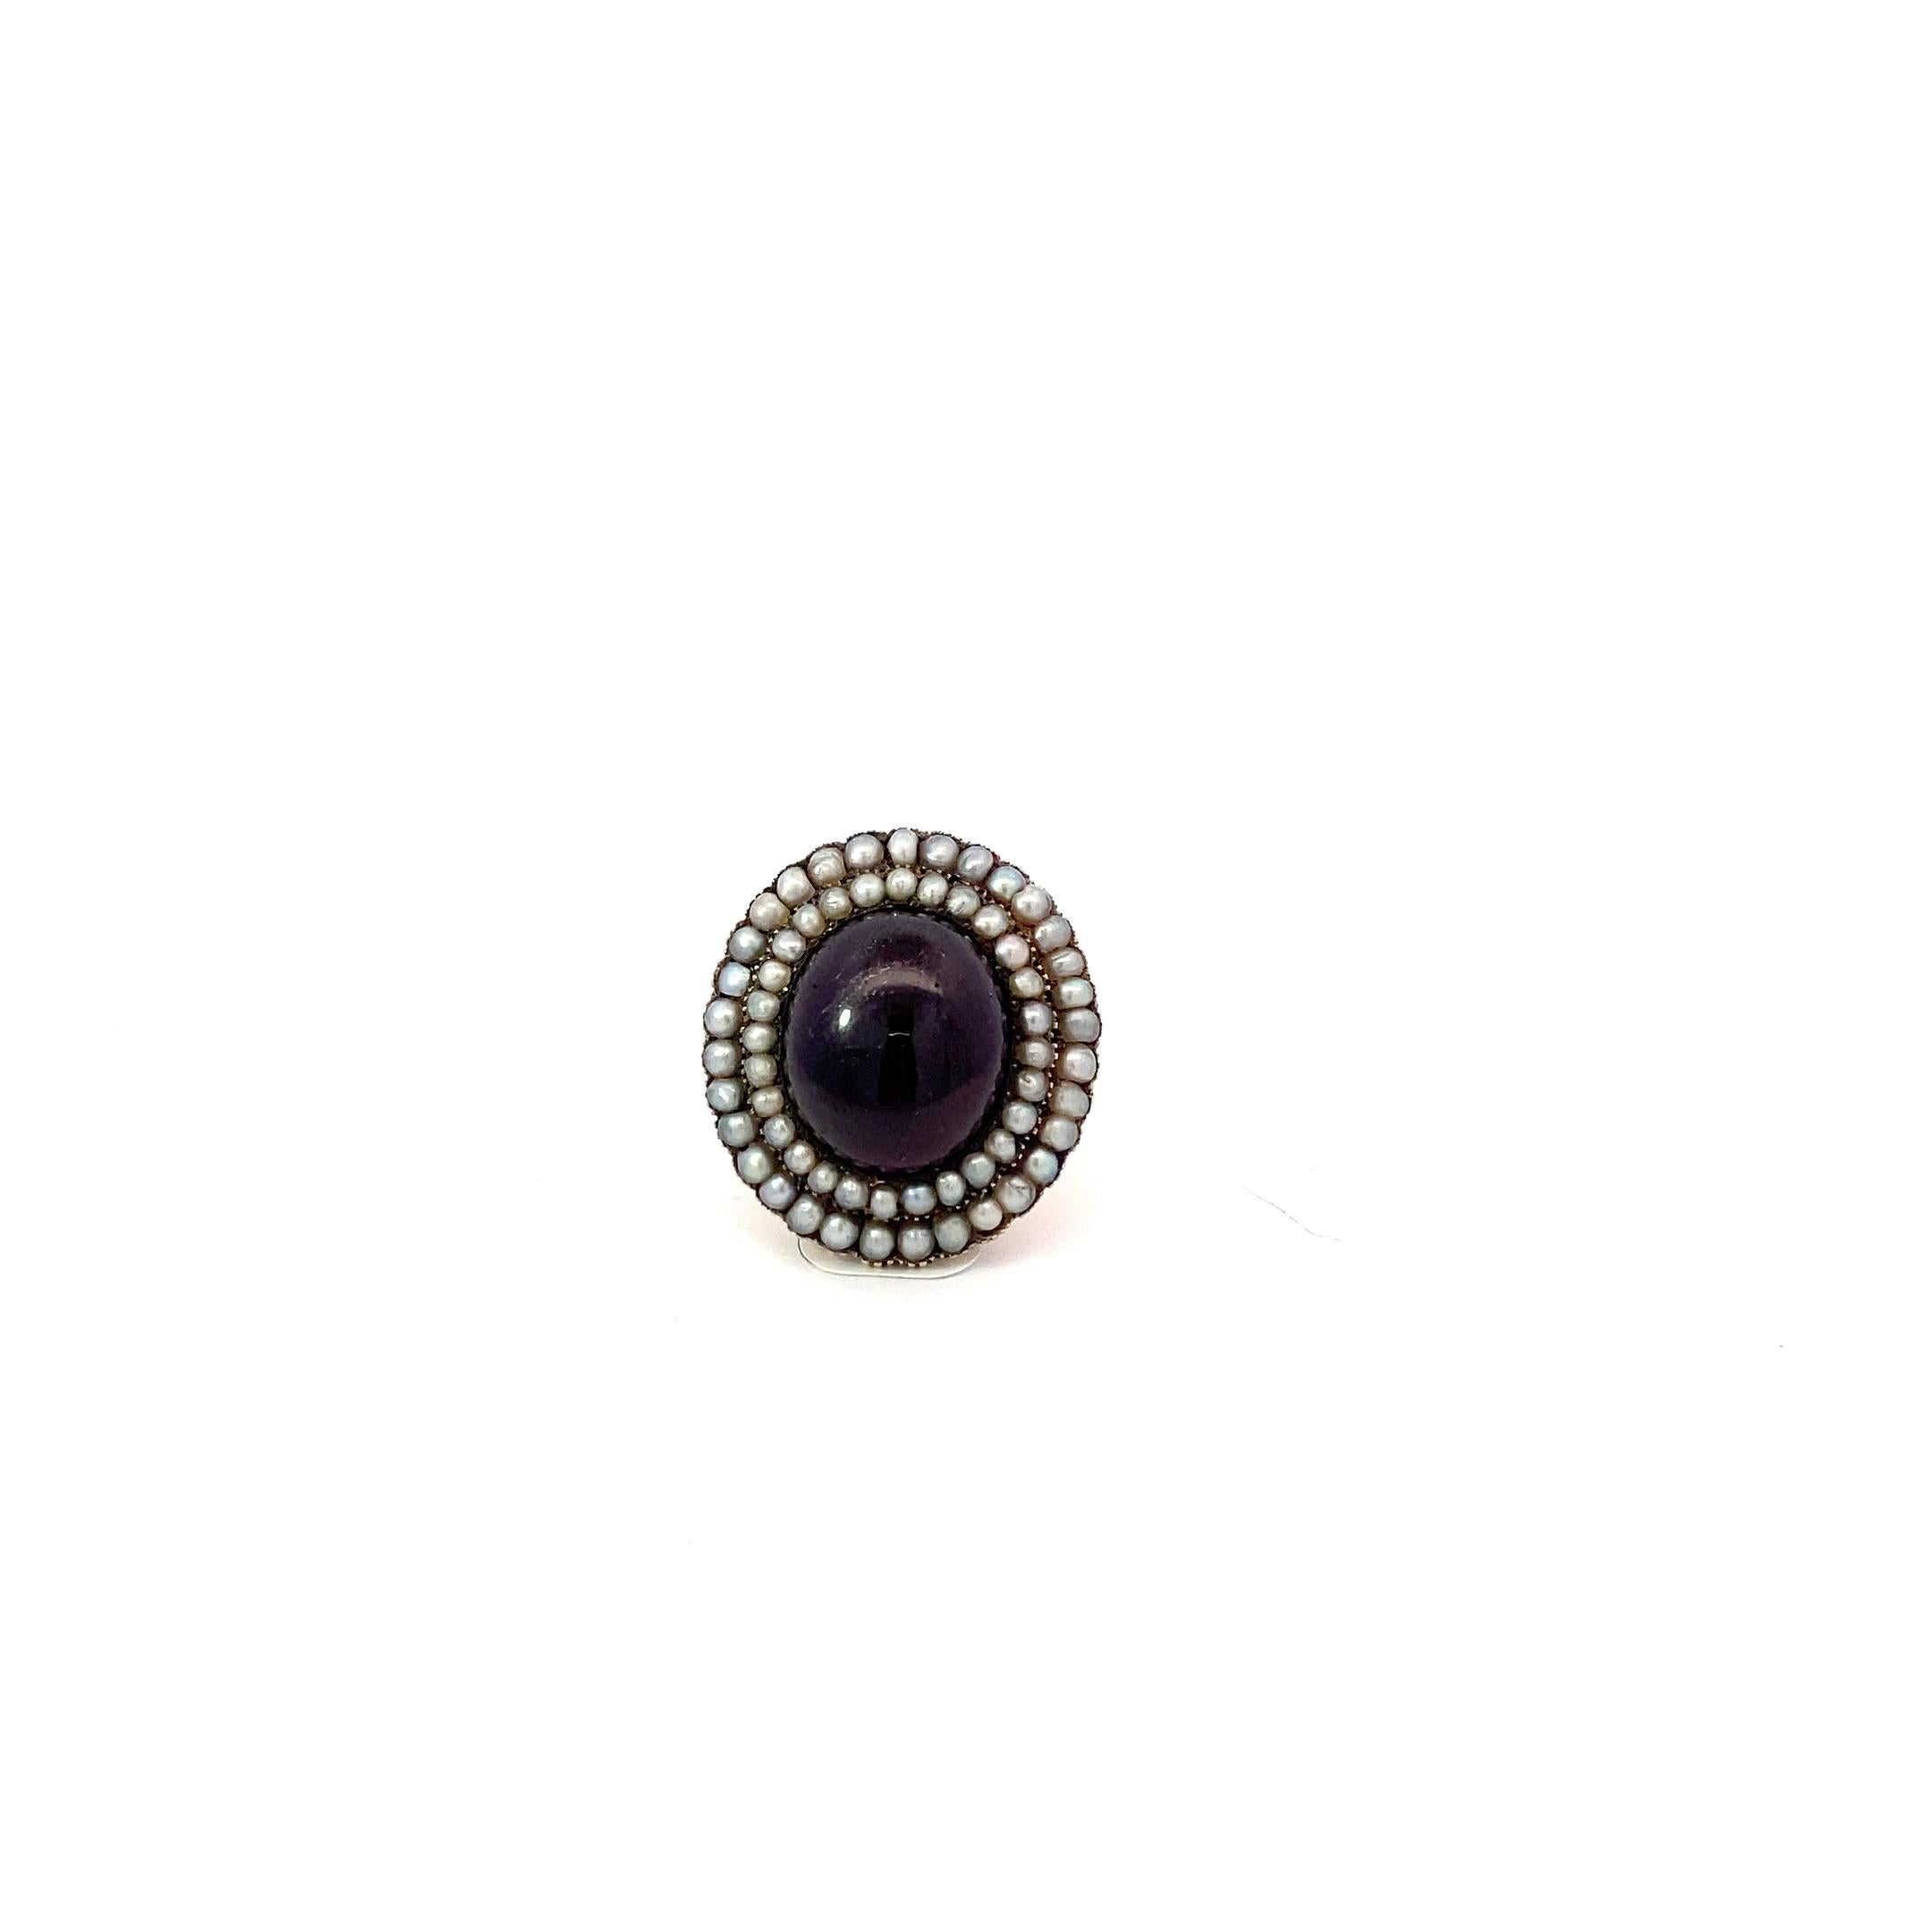 Powerfully large statement ring from the Victorian Period. This unique ring features a one of a kind 13.45 ct garnet cabochon with a deep rich color, almost purple. The garnet is approx 13mm x 20mm and sits over a half inch off the finger. The